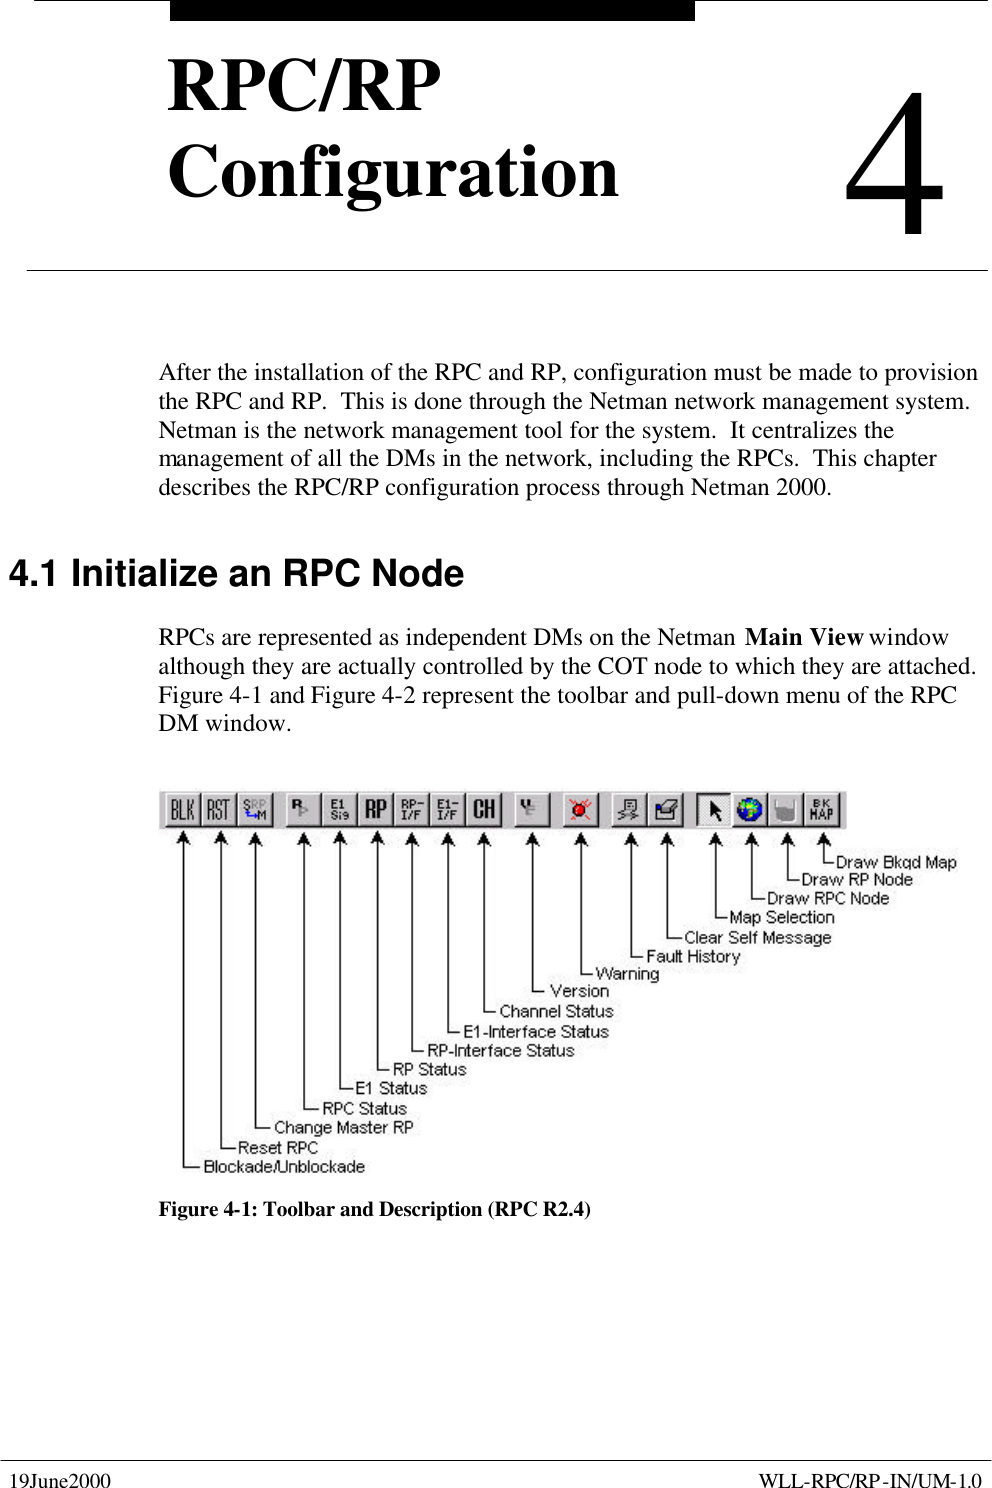  19June2000    WLL-RPC/RP-IN/UM-1.0  4 RPC/RP Configuration 4 RPC/RP Configuration After the installation of the RPC and RP, configuration must be made to provision the RPC and RP.  This is done through the Netman network management system.  Netman is the network management tool for the system.  It centralizes the management of all the DMs in the network, including the RPCs.  This chapter describes the RPC/RP configuration process through Netman 2000. 4.1 Initialize an RPC Node  RPCs are represented as independent DMs on the Netman Main View window although they are actually controlled by the COT node to which they are attached.  Figure 4-1 and Figure 4-2 represent the toolbar and pull-down menu of the RPC DM window.  Figure 4-1: Toolbar and Description (RPC R2.4) 